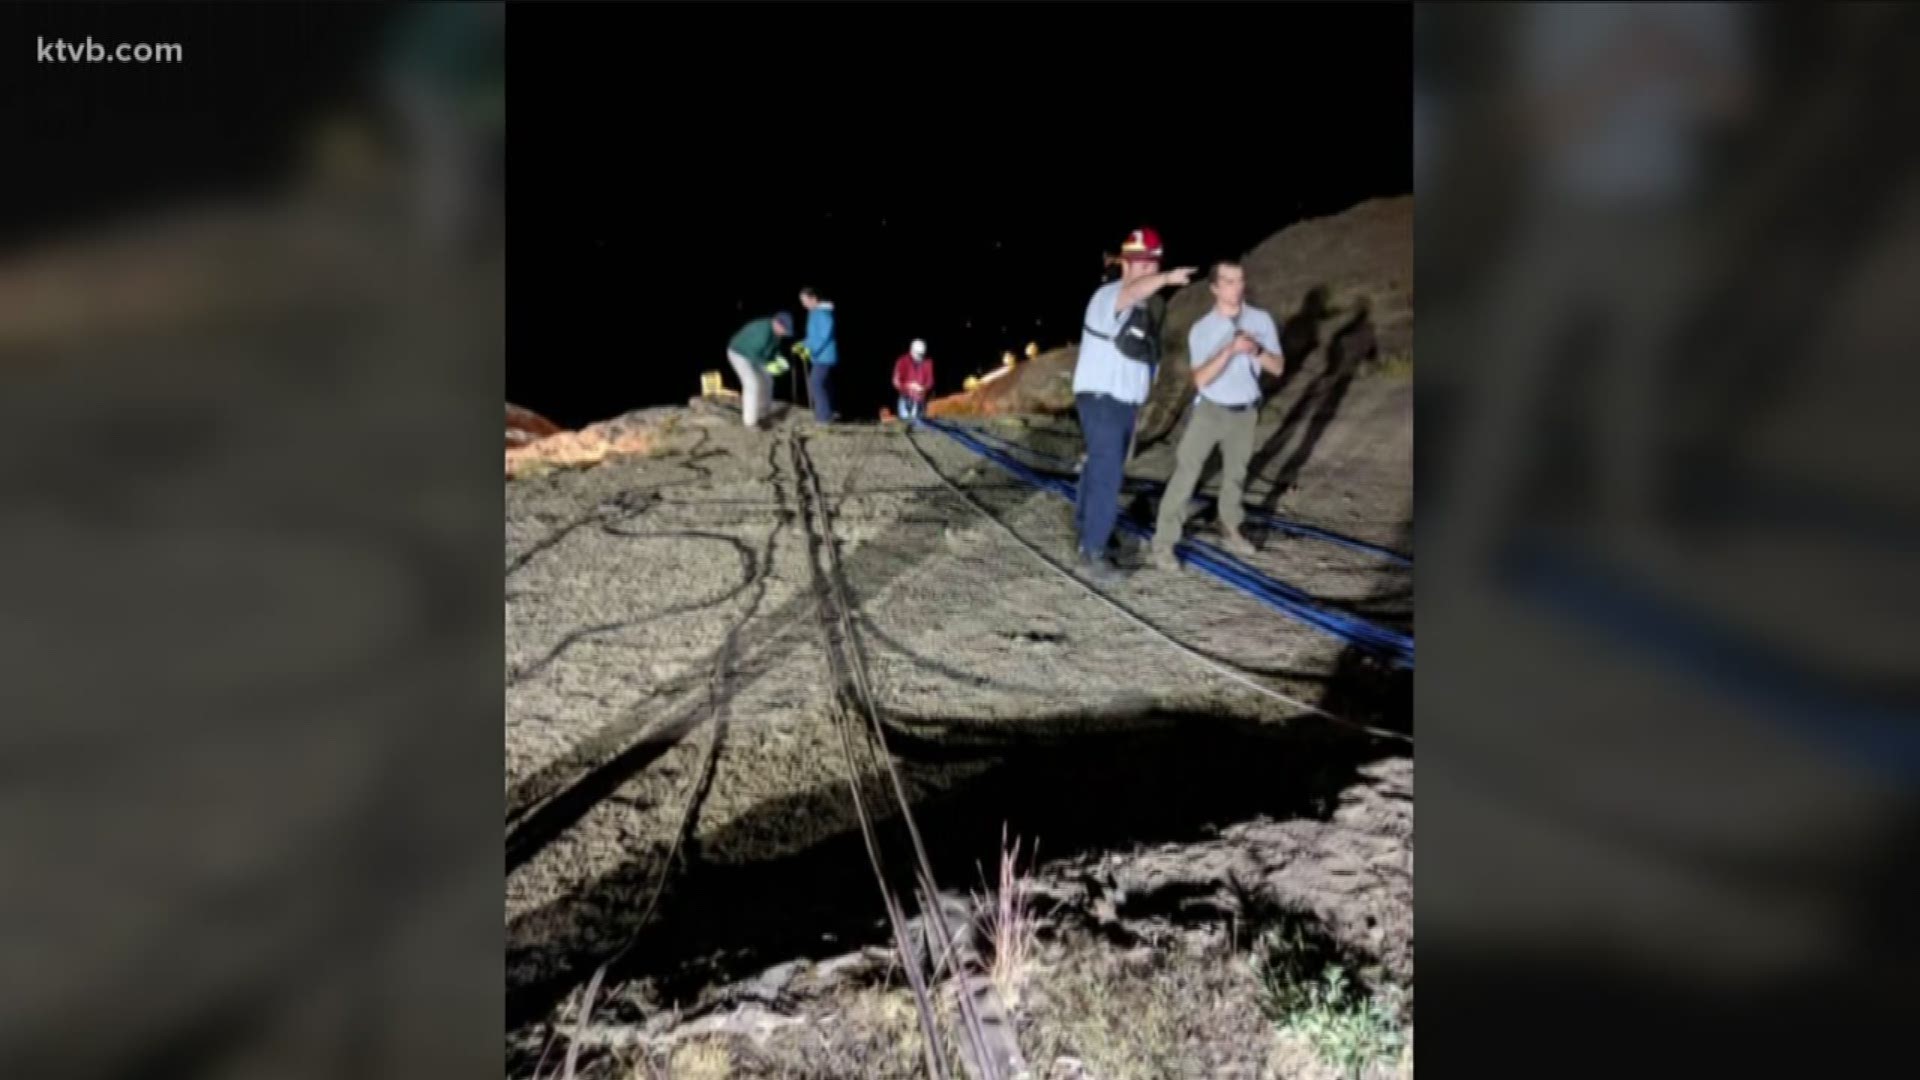 Members of the La Grande Rural Fire Protection District had just wrapped up training when they received a call about a person who fell down a cliff face.